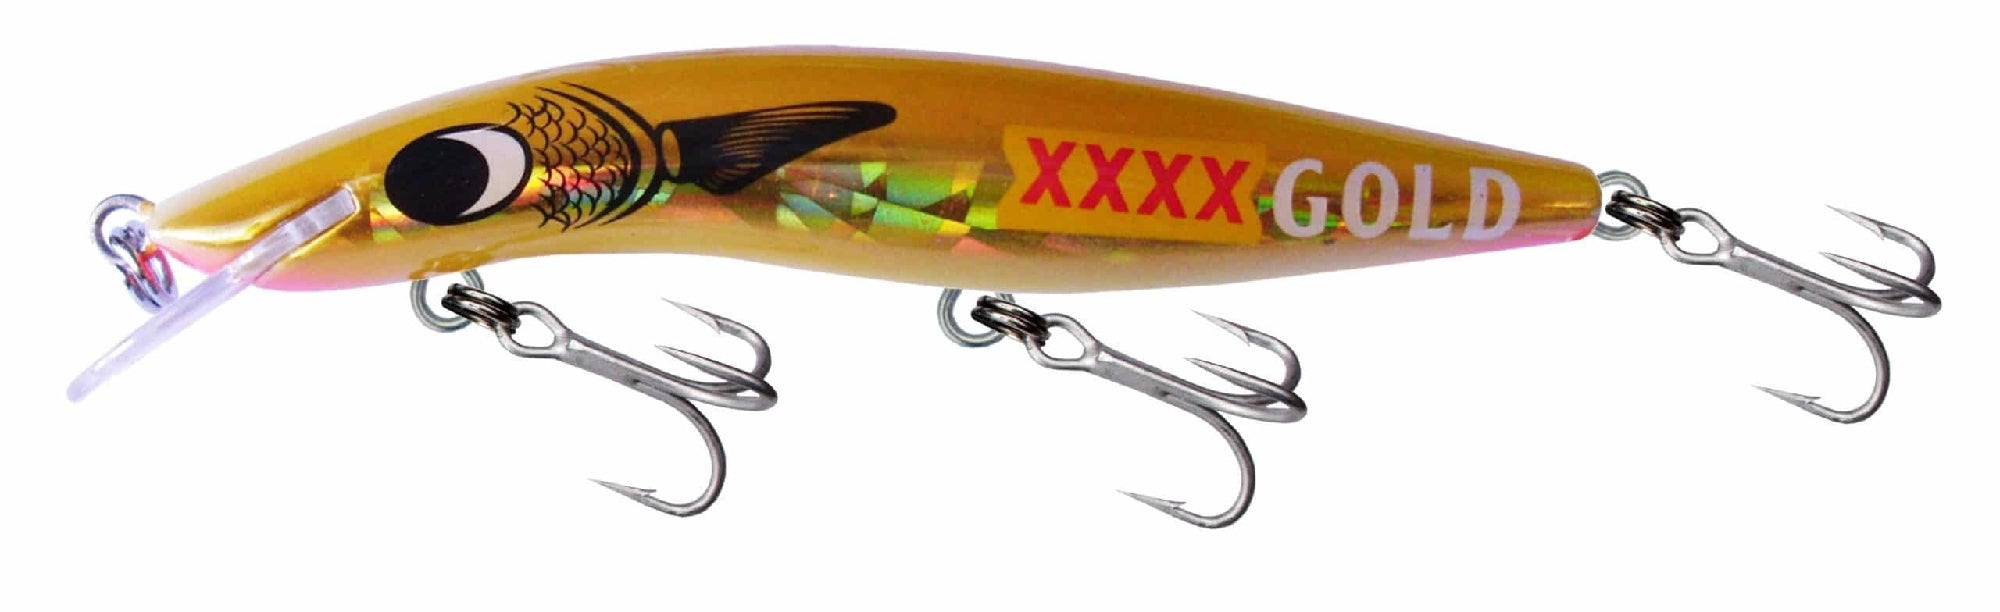 Classic Lures 120 +20ft